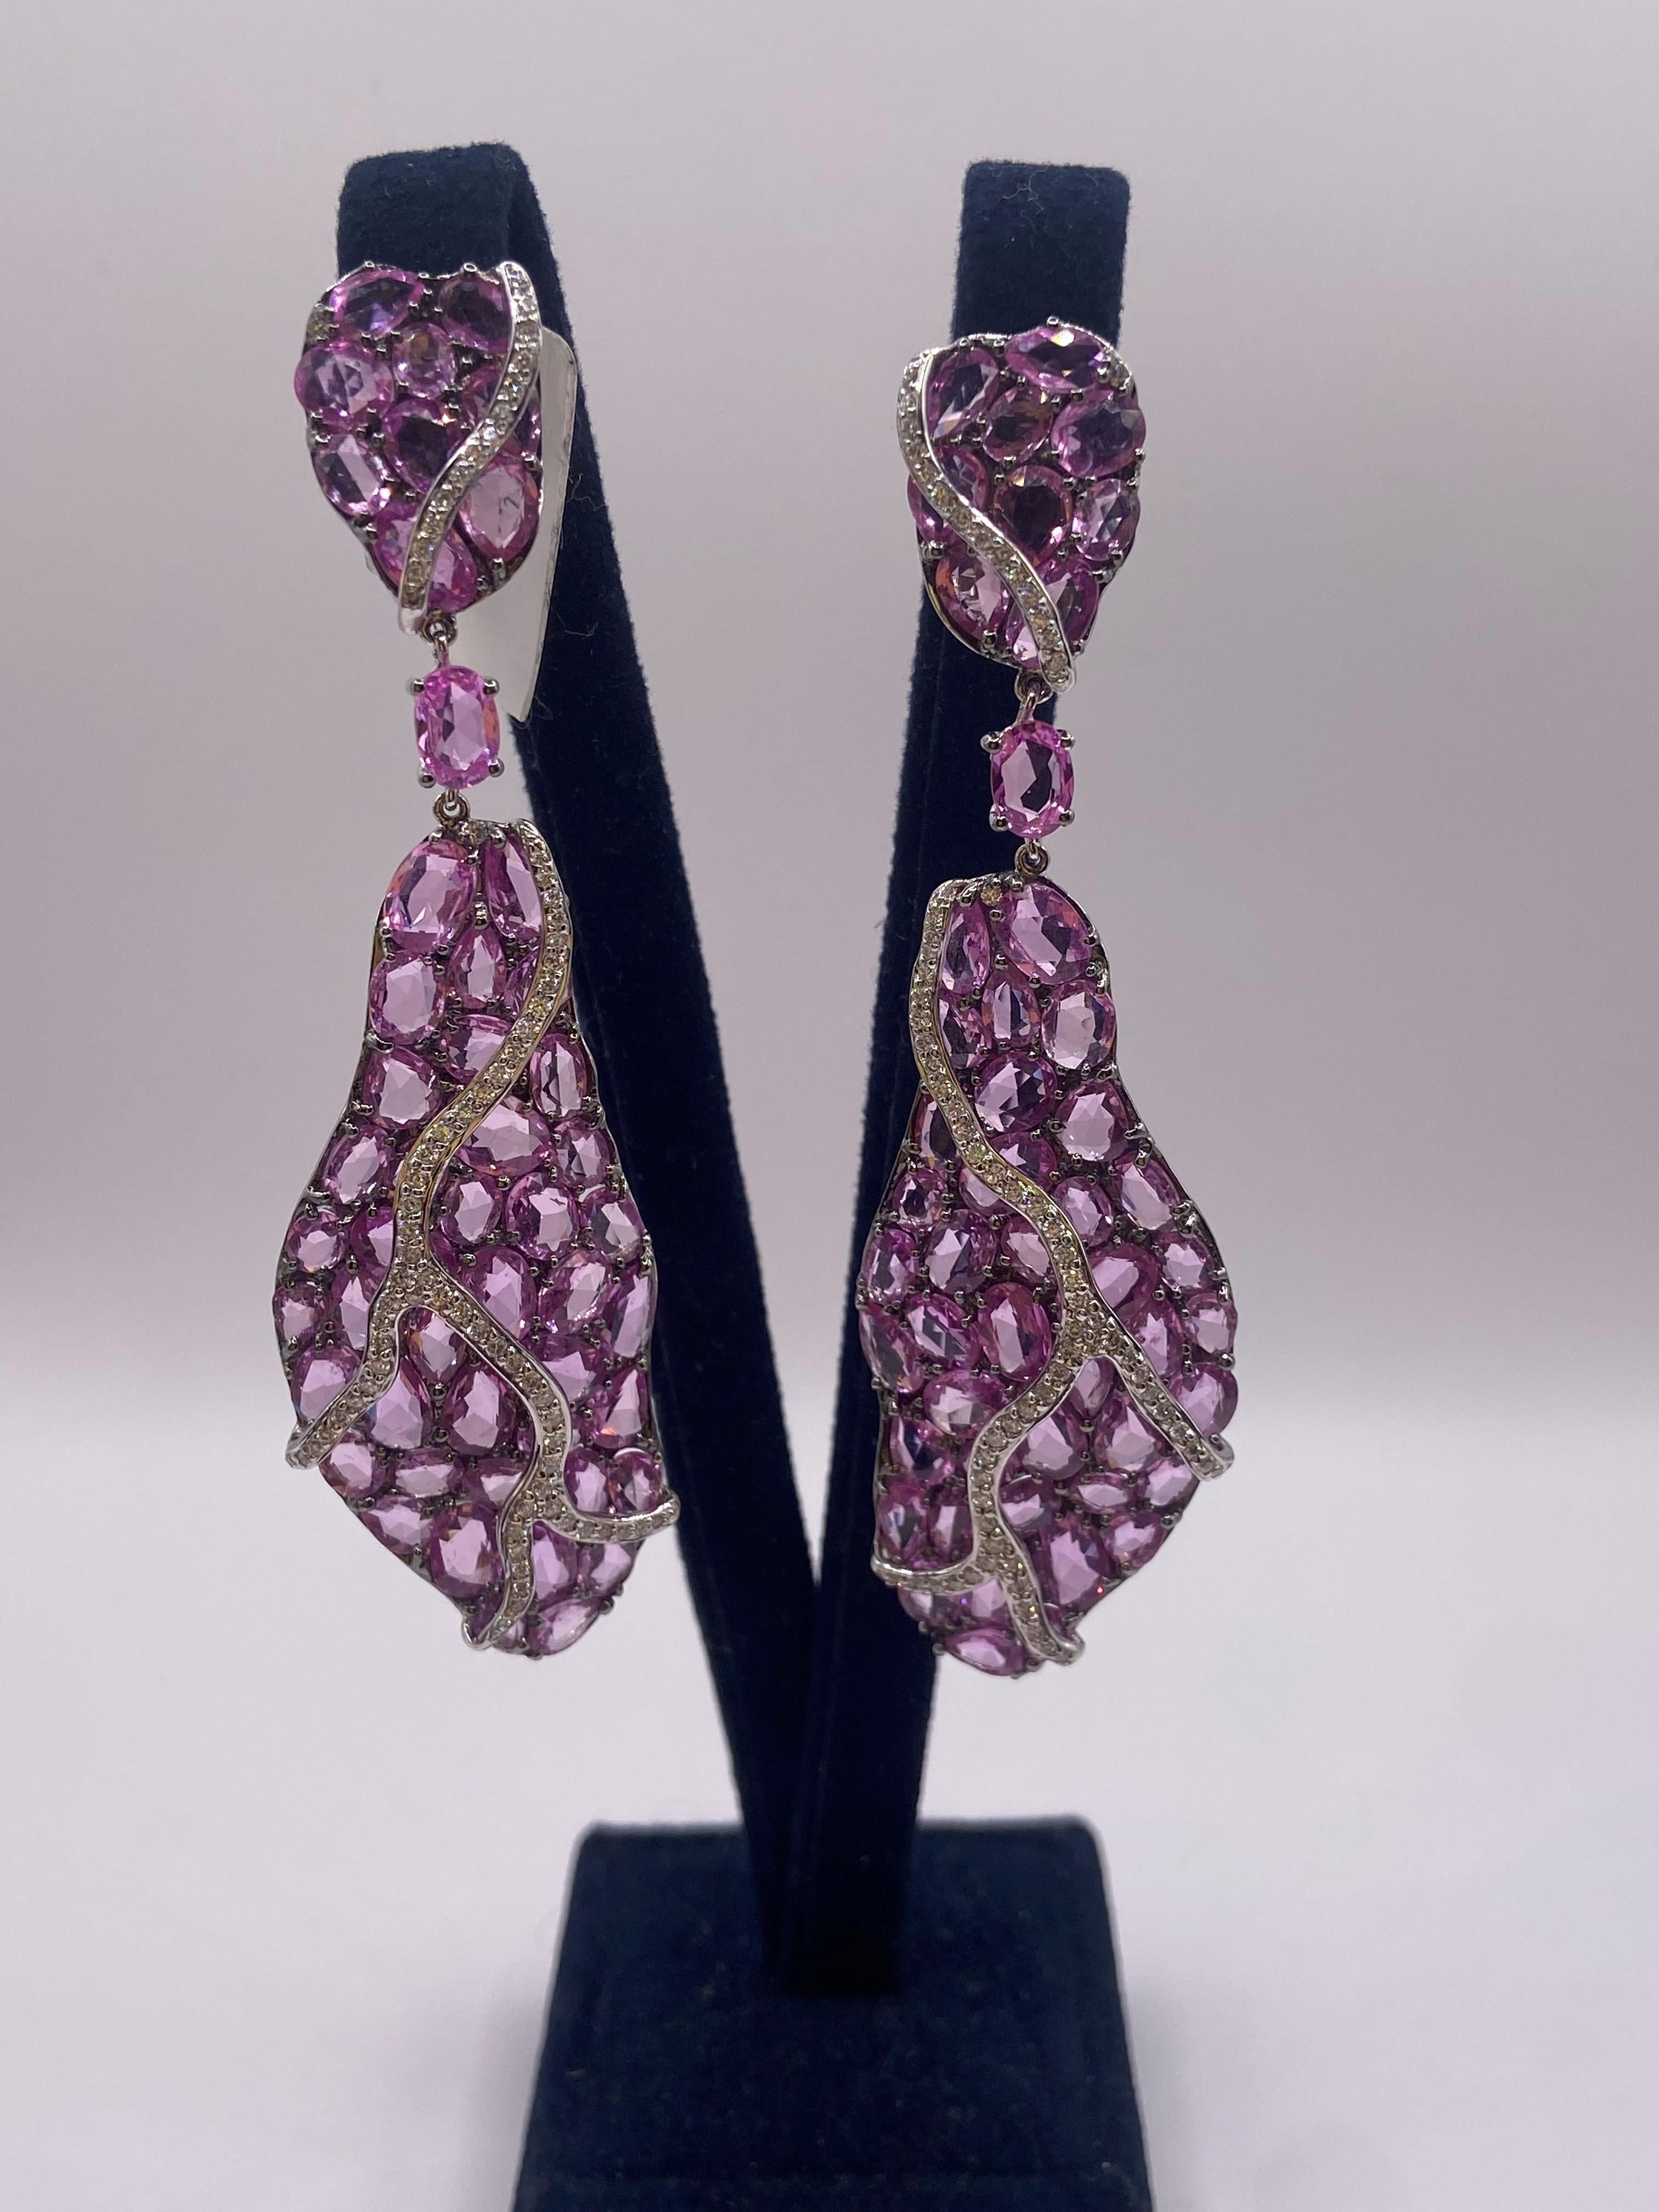 29.24ct Rose Cut Fancy Pink Sapphire & Round Diamond Earrings in 18KT White Gold In New Condition For Sale In New York, NY